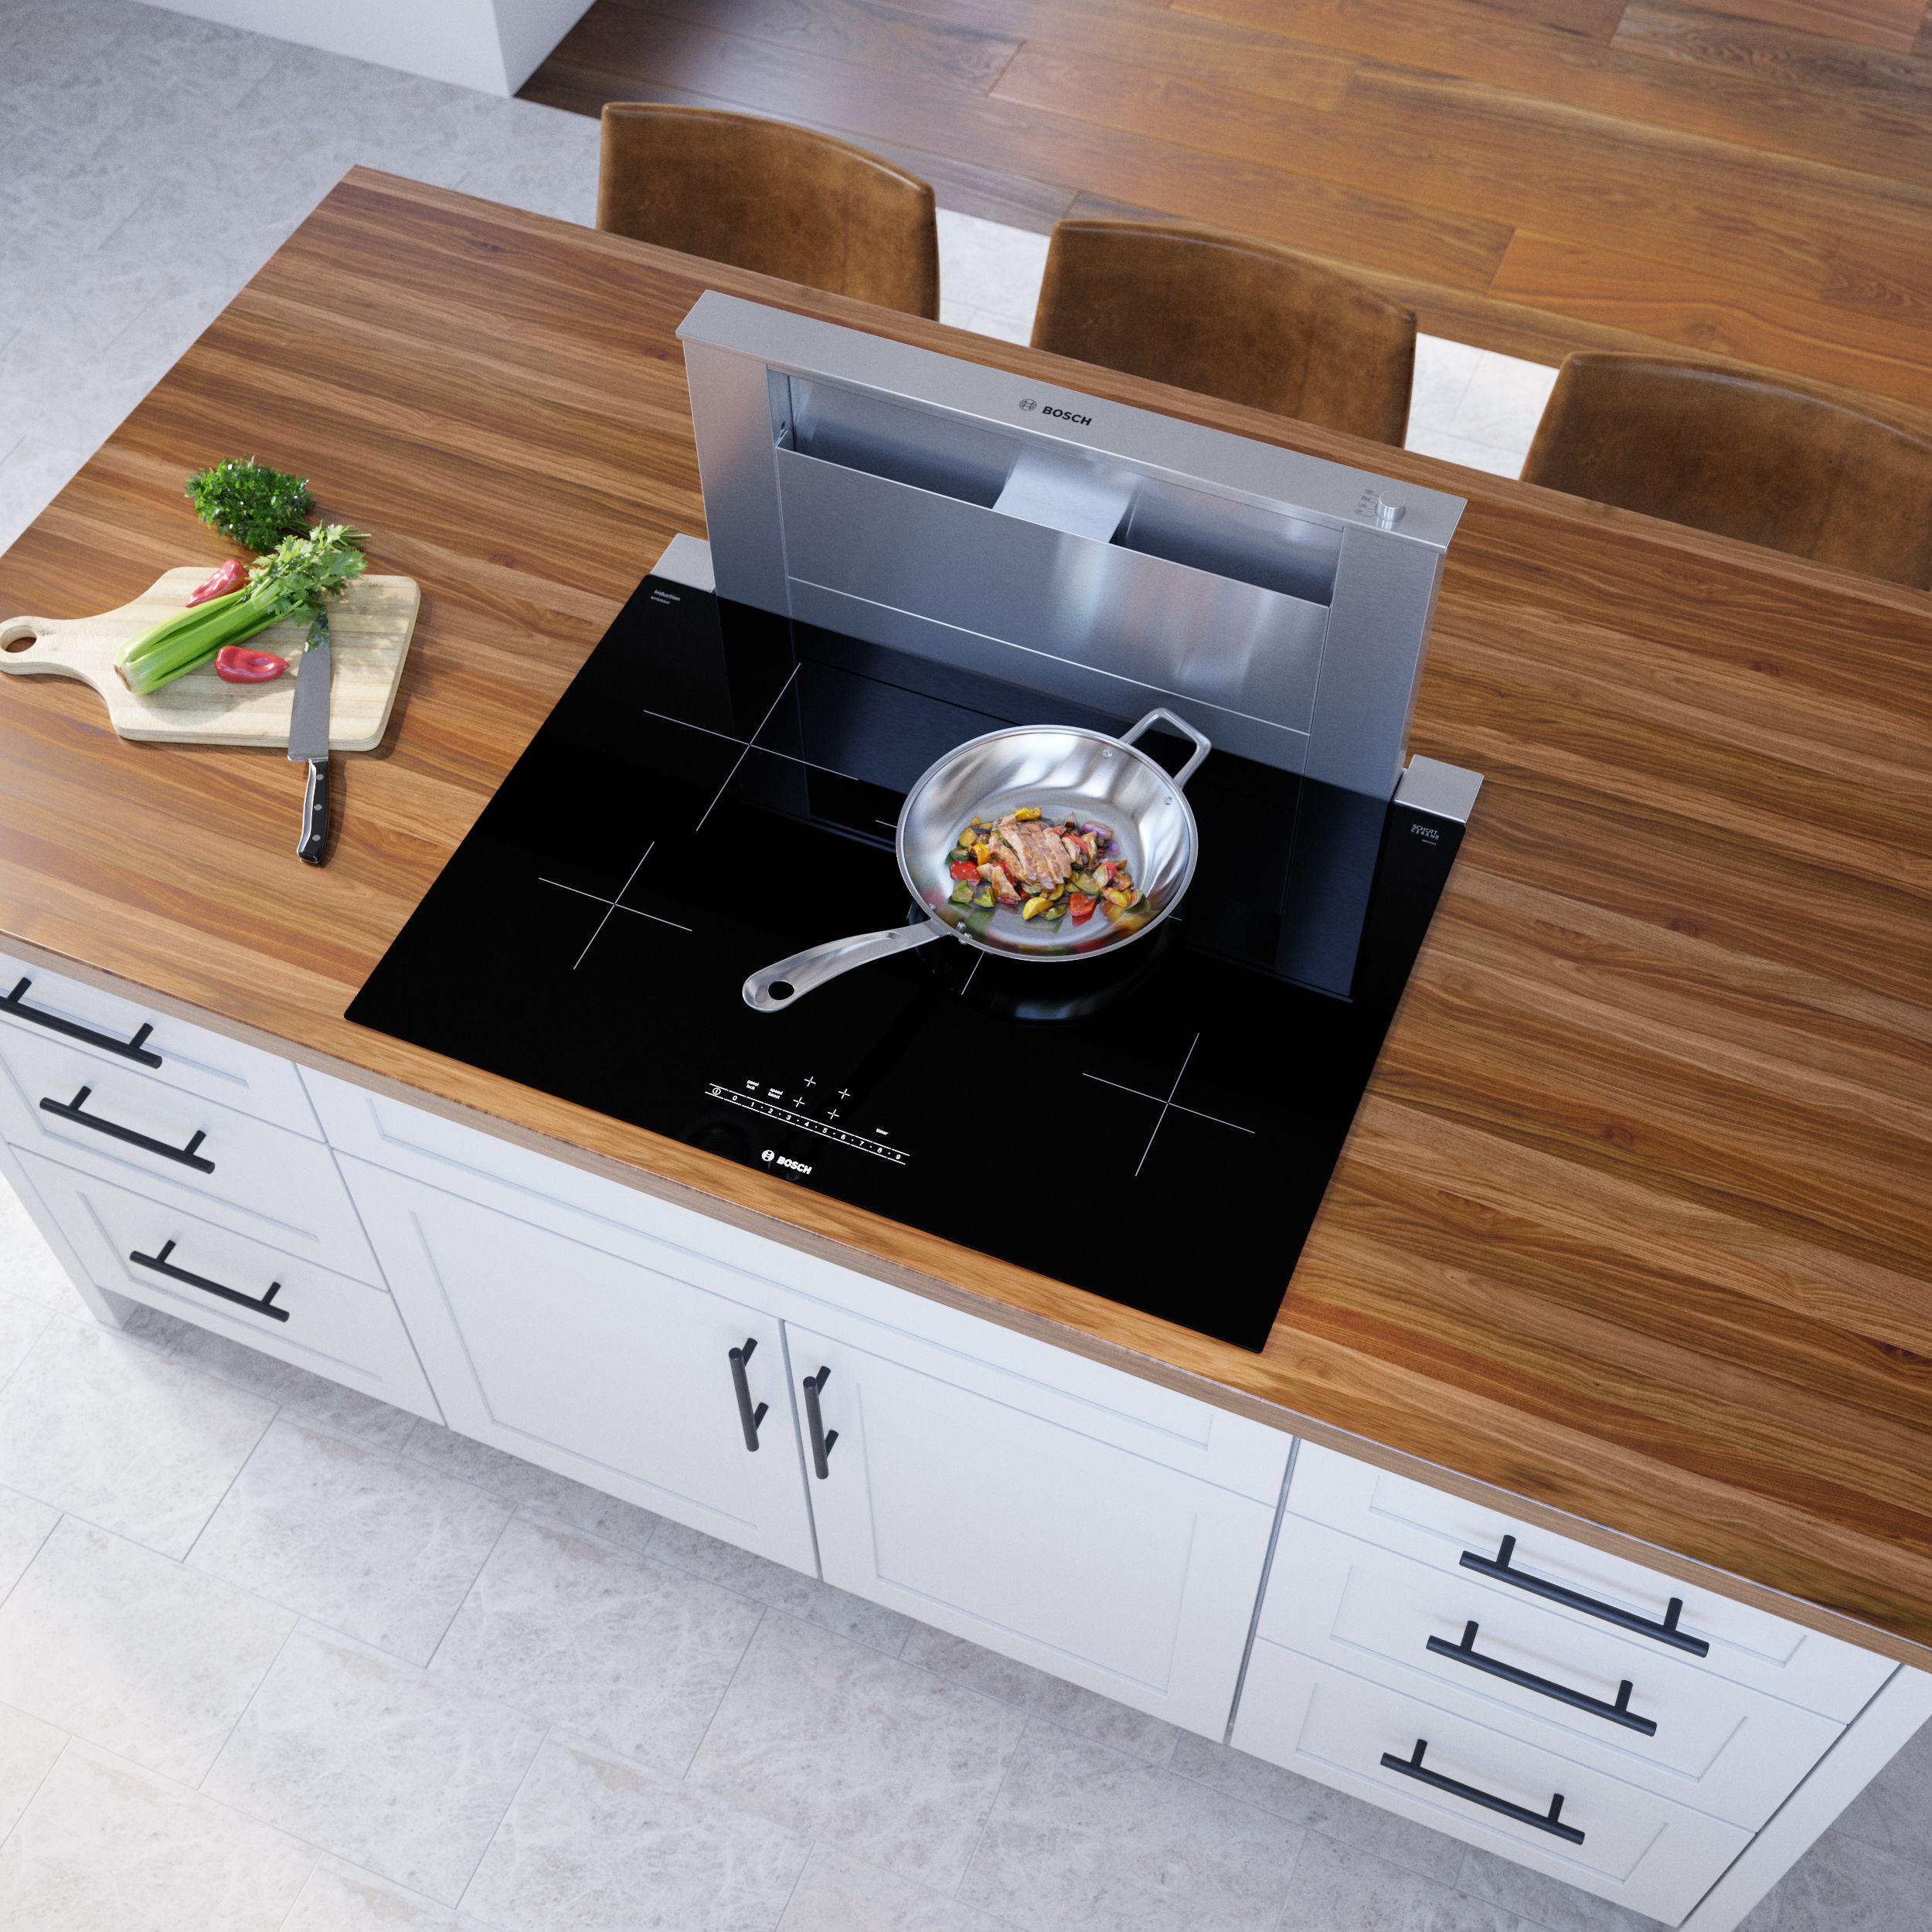 Cooktops for Every Home